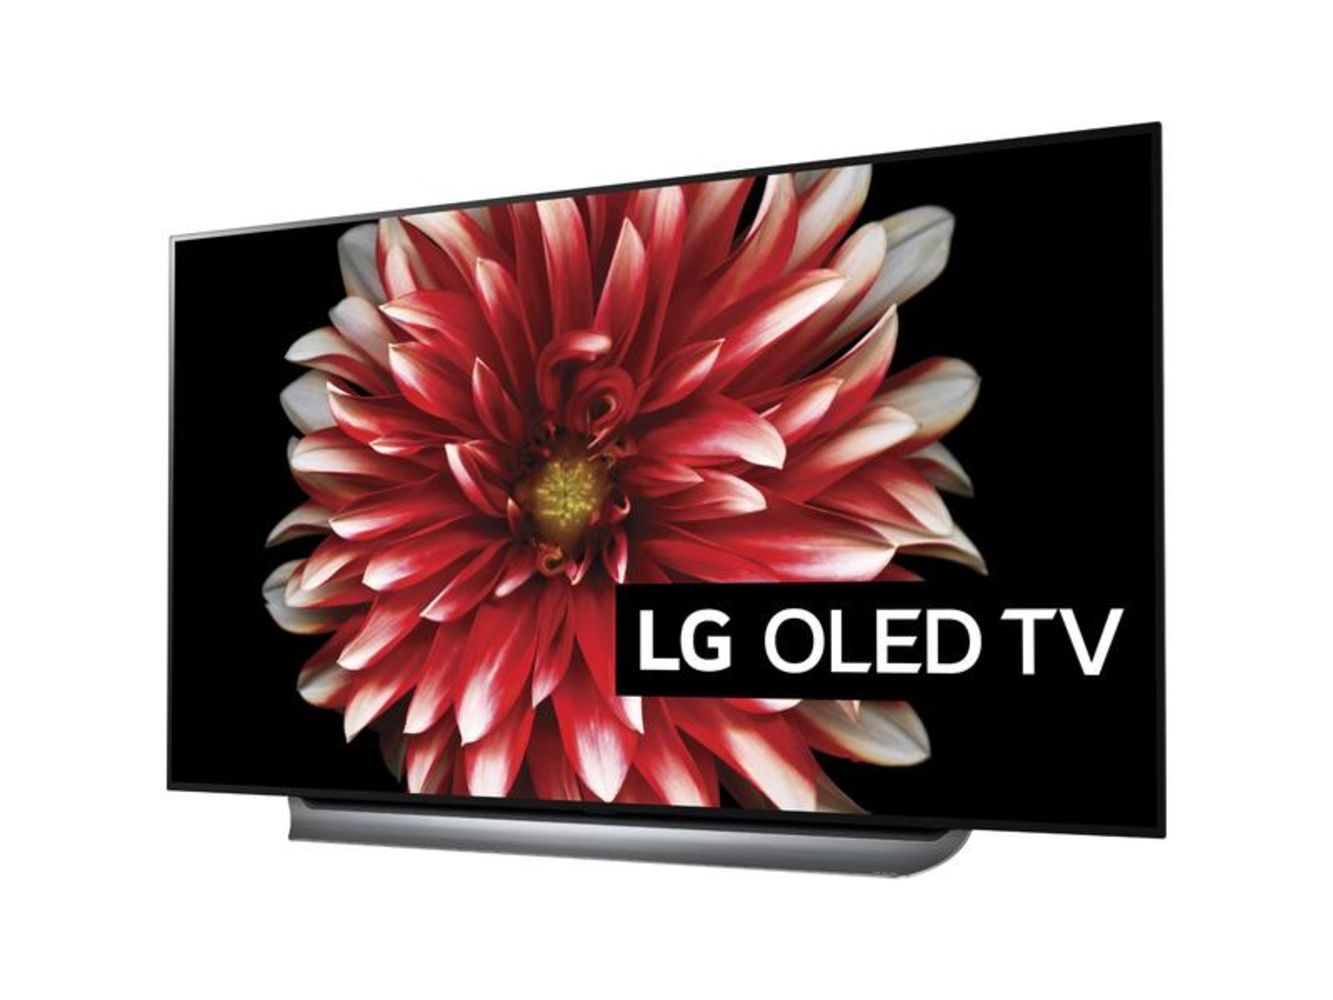 LG TV's up to 77", Designer Accessories, Apple Tech, Branded Tools, Homewares  & More